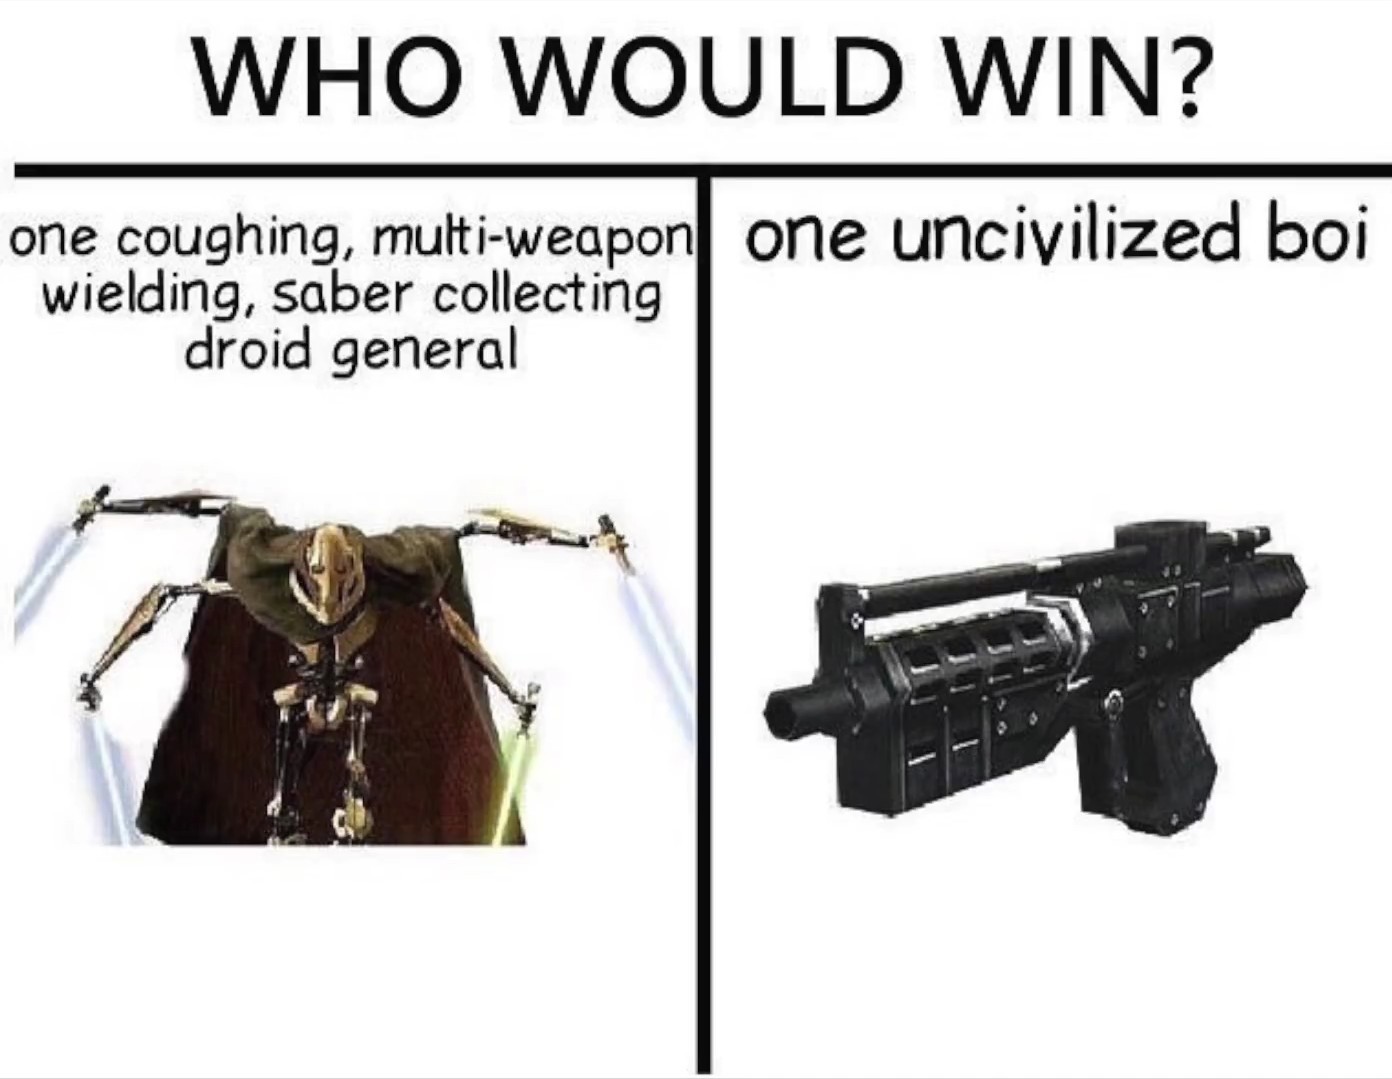 How long have the who would win memes been dead